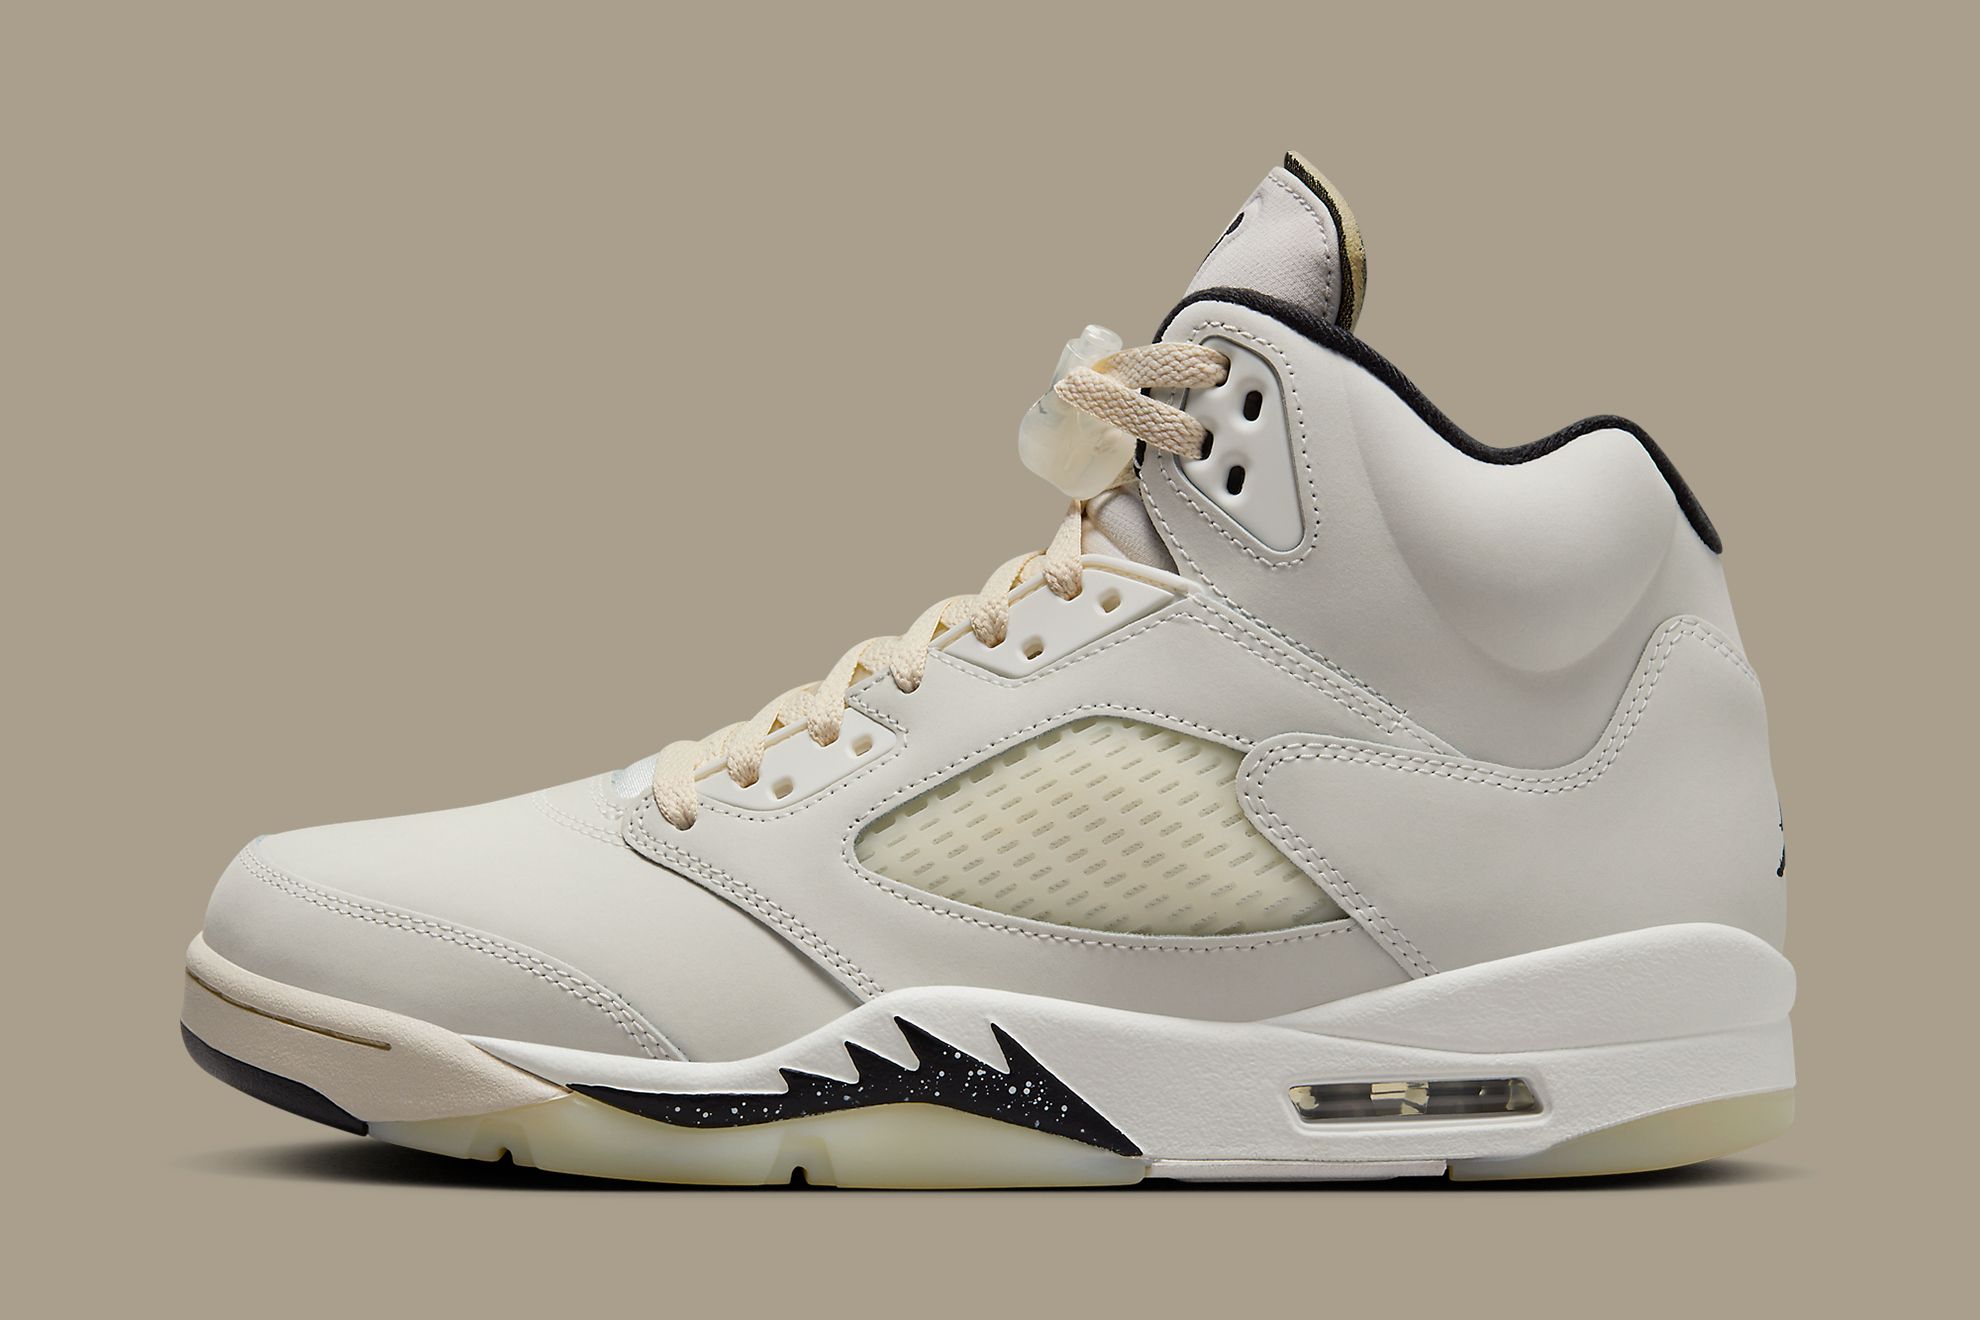 The Air Jordan 5 Gets a Special Edition Makeover in 'Sail'